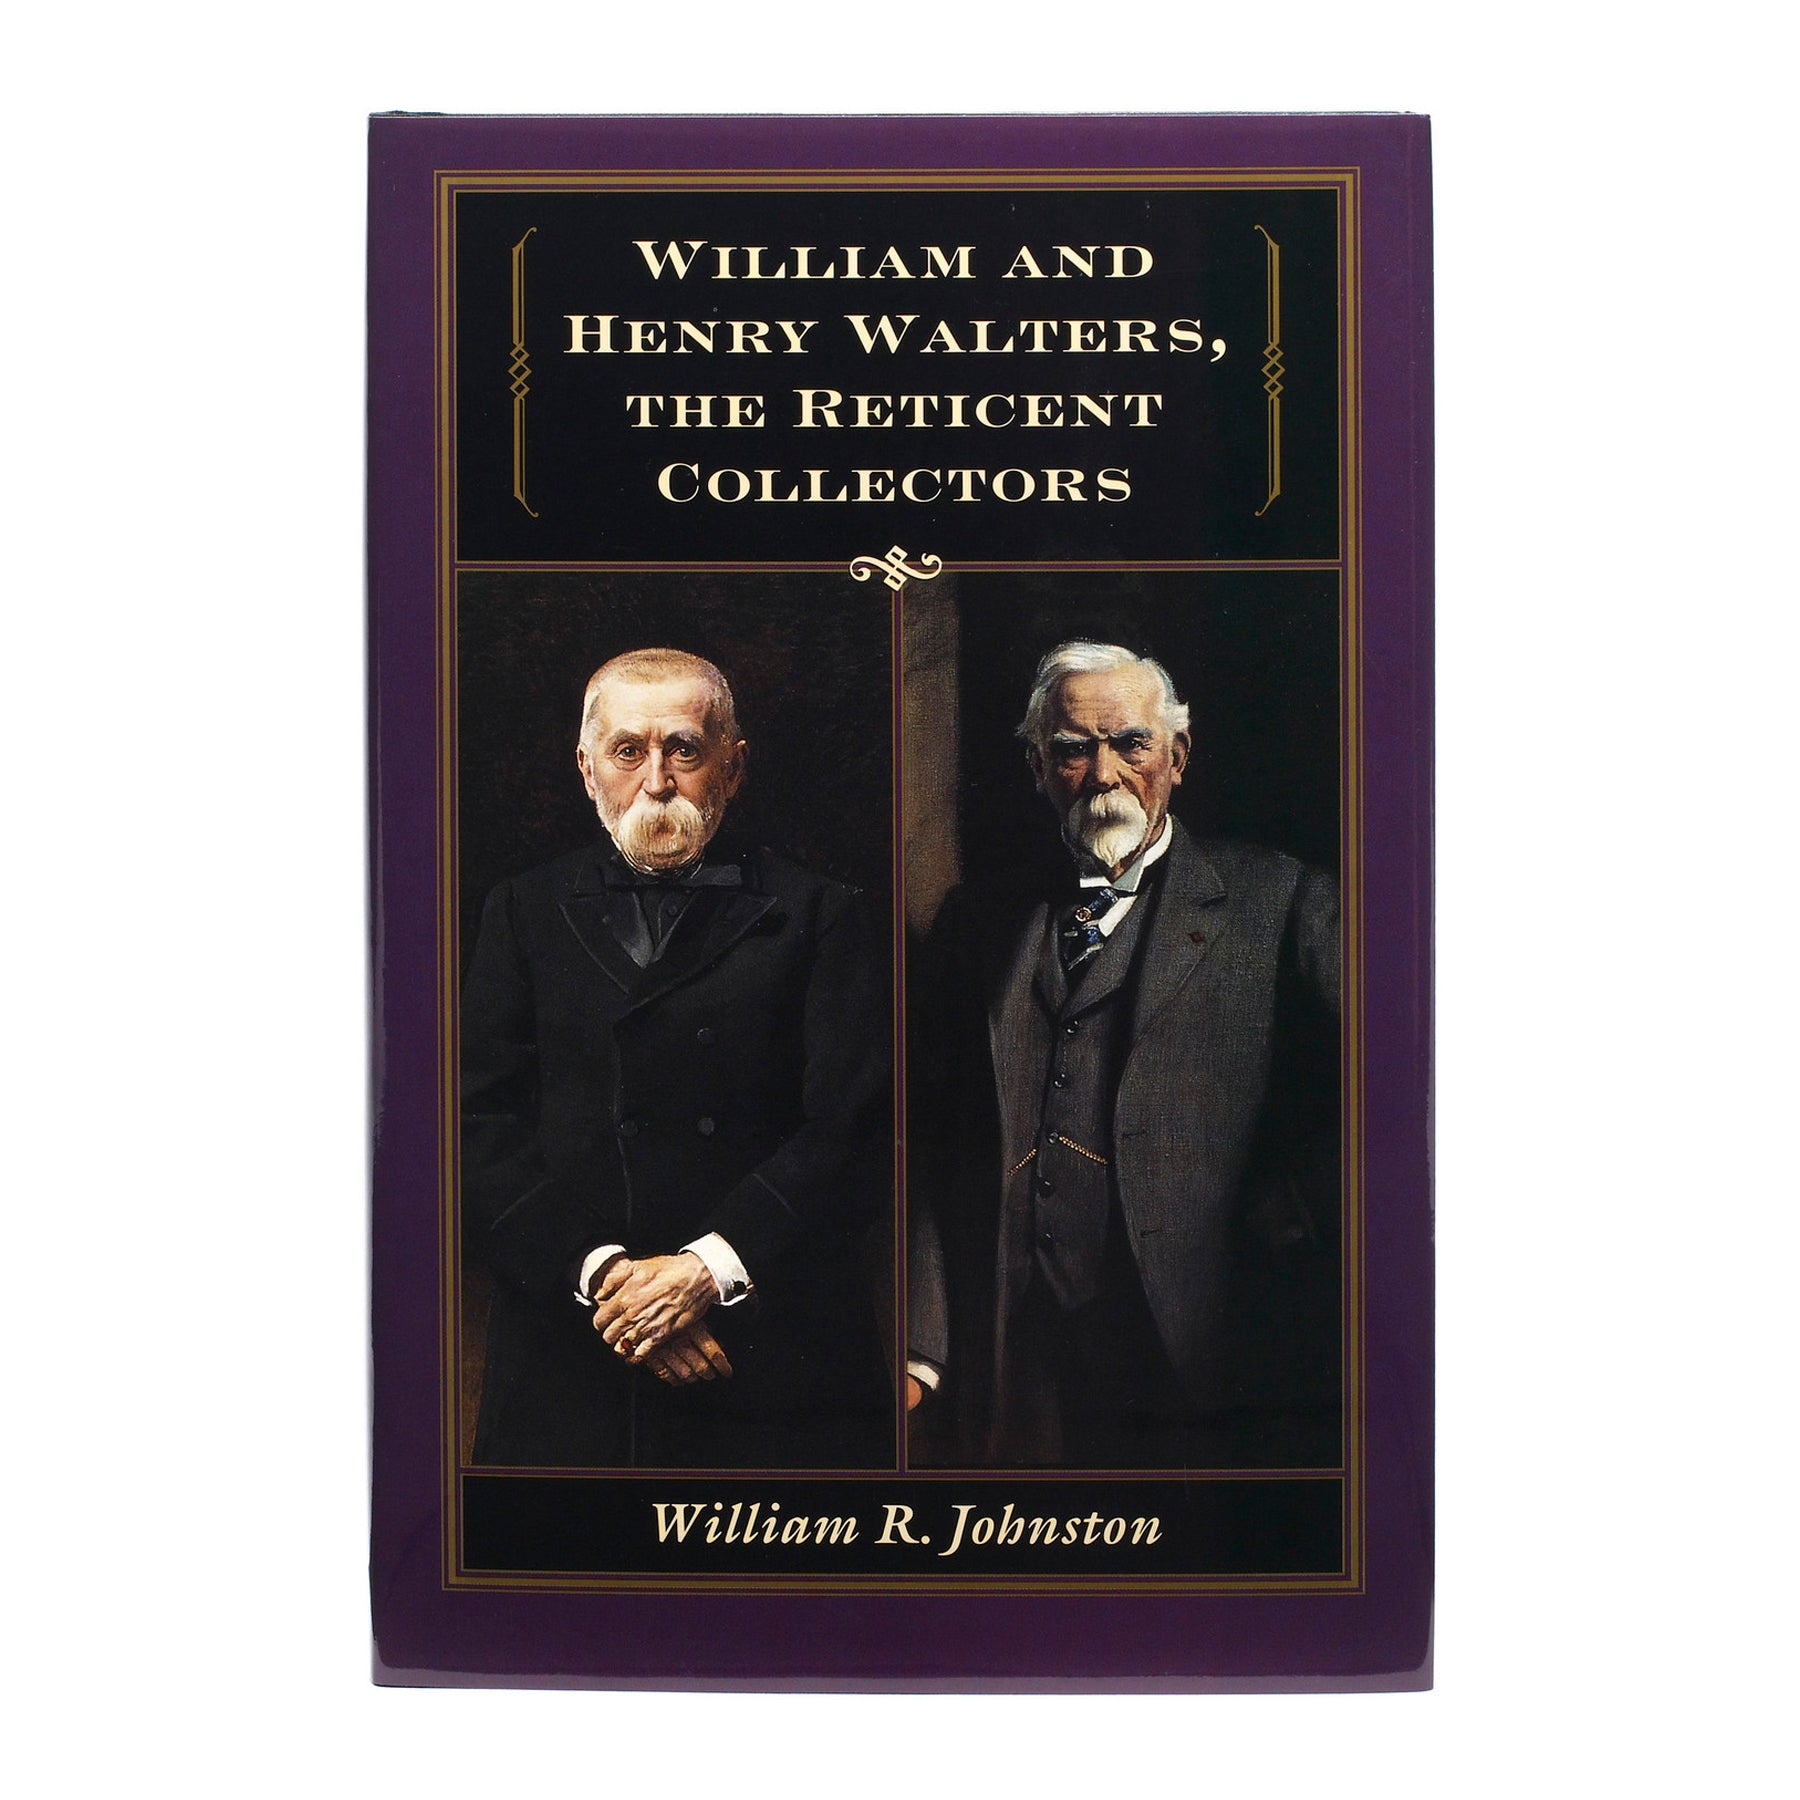 William and Henry Walters, The Reticent Collectors